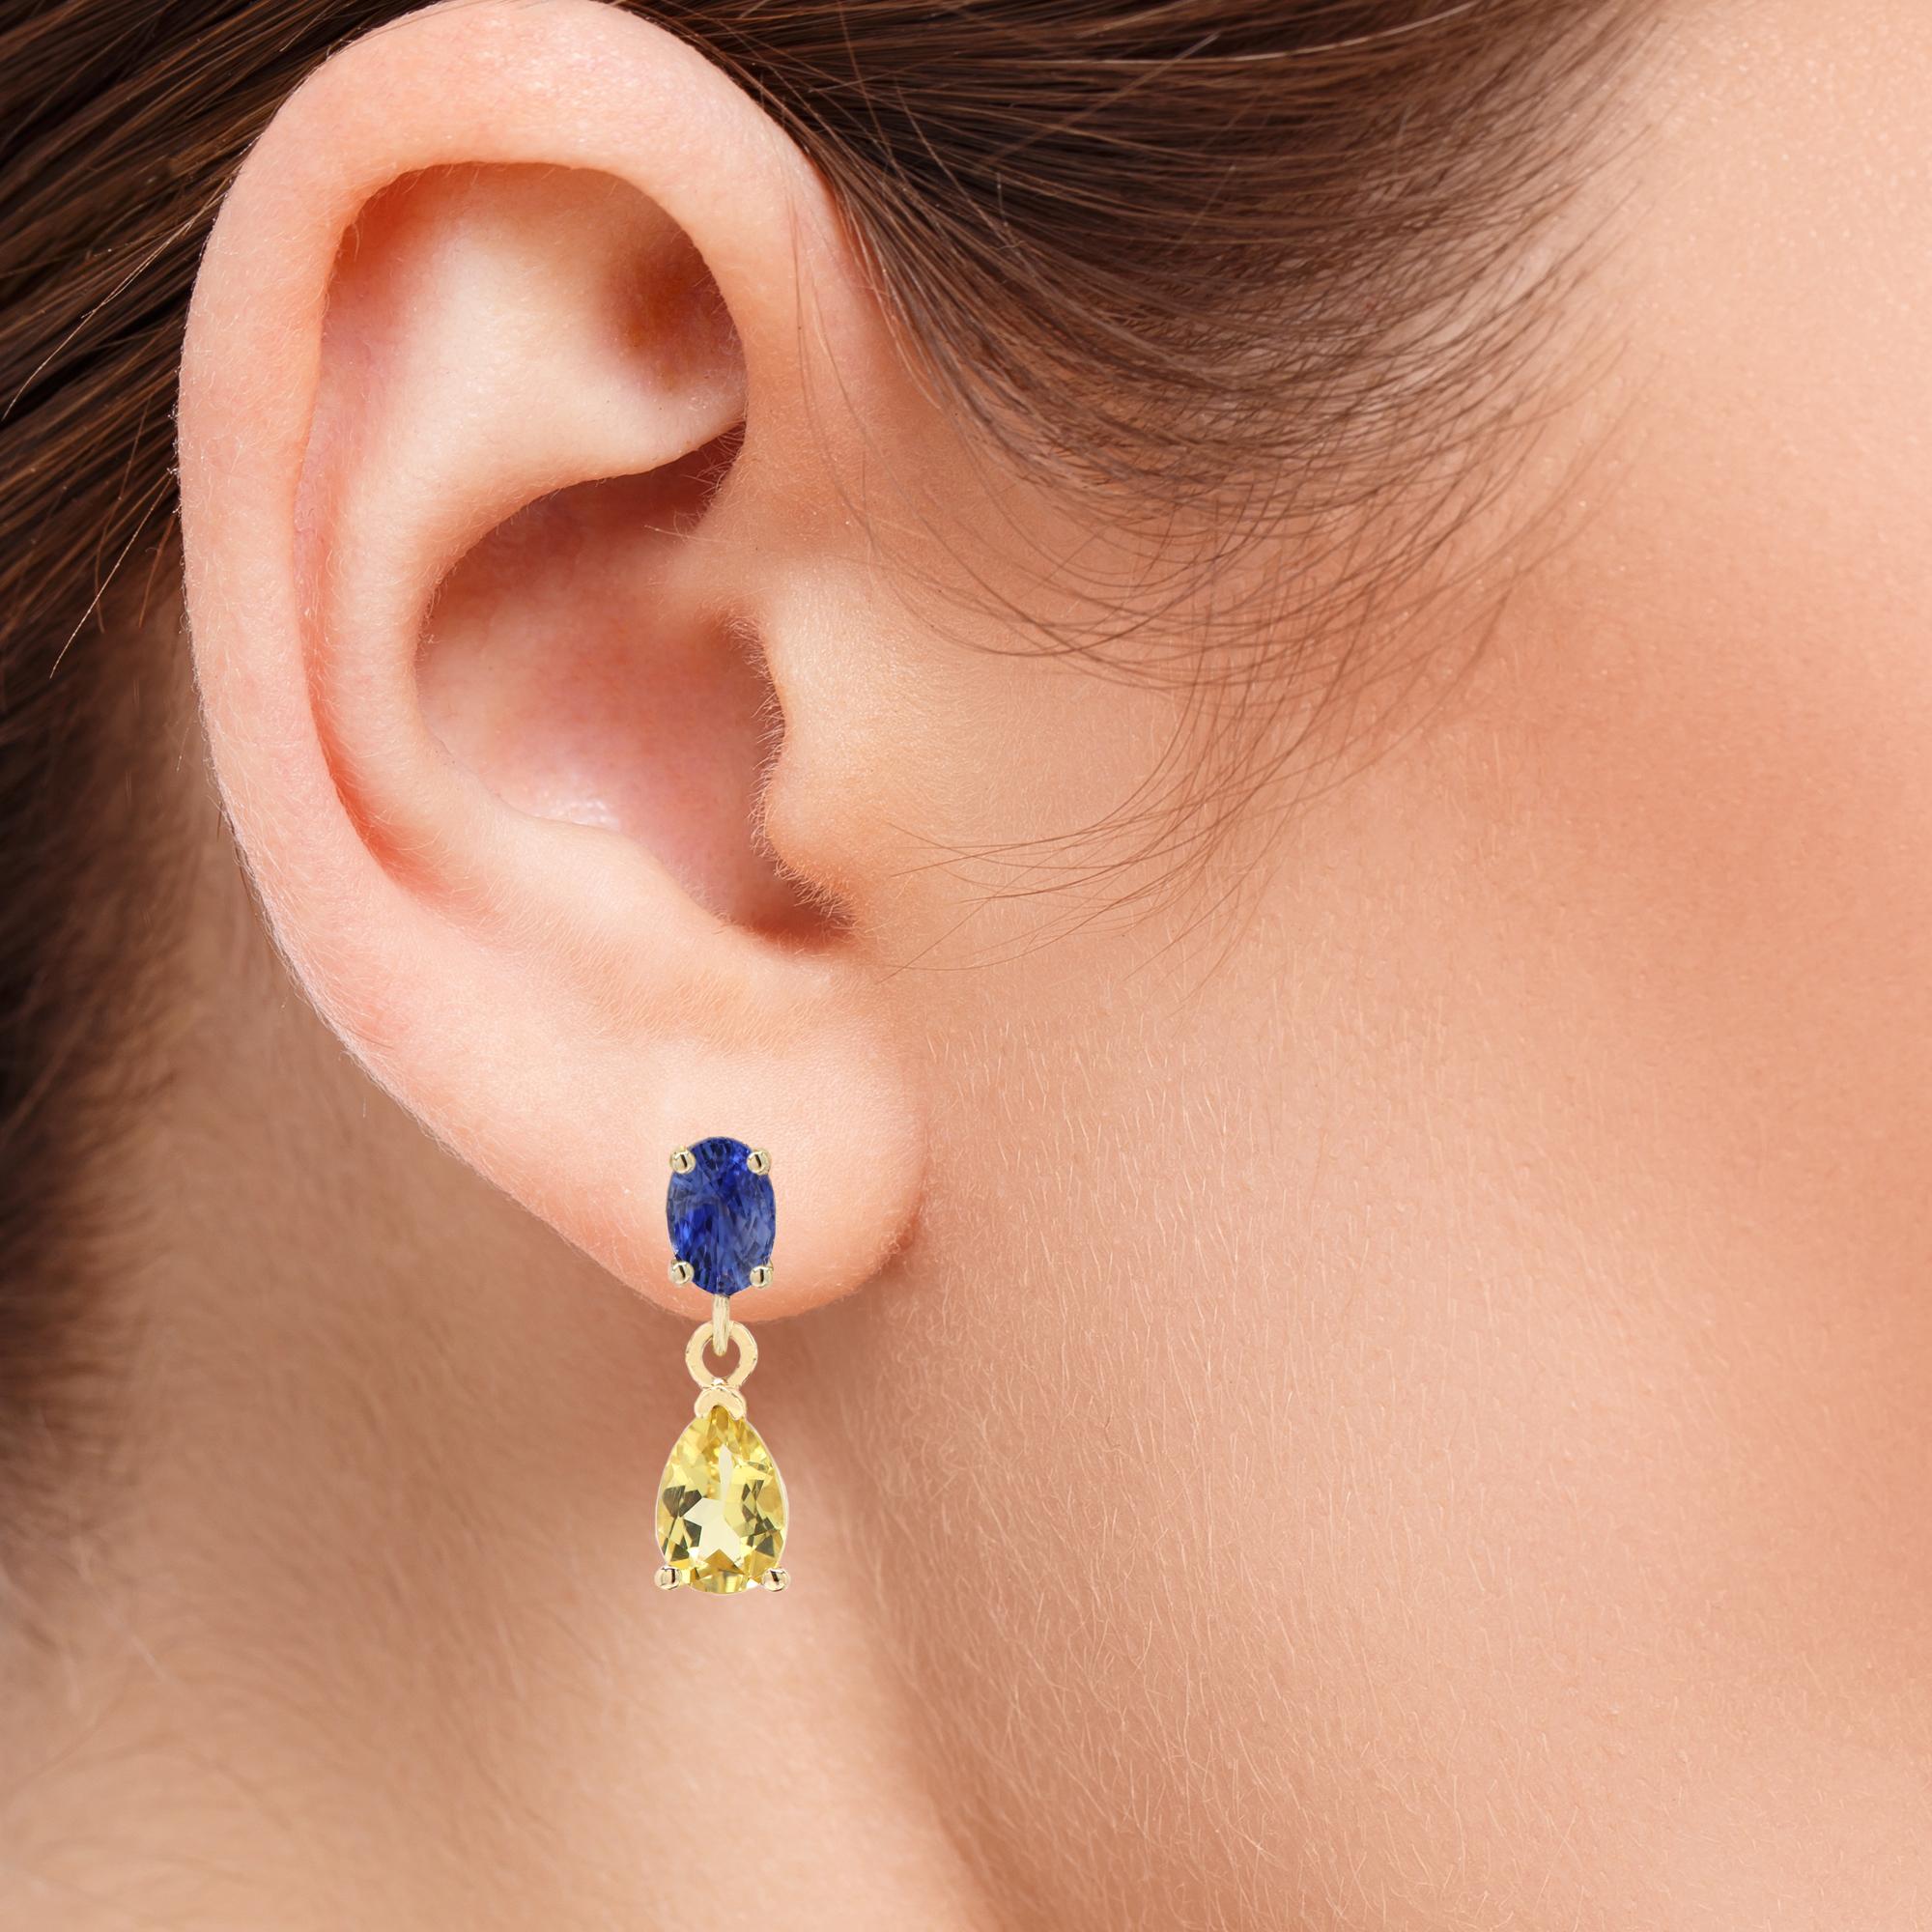 Cute Small Dangle Earrings 14 Karat Yellow Gold Blue Sapphire and Citrine For Sale 3